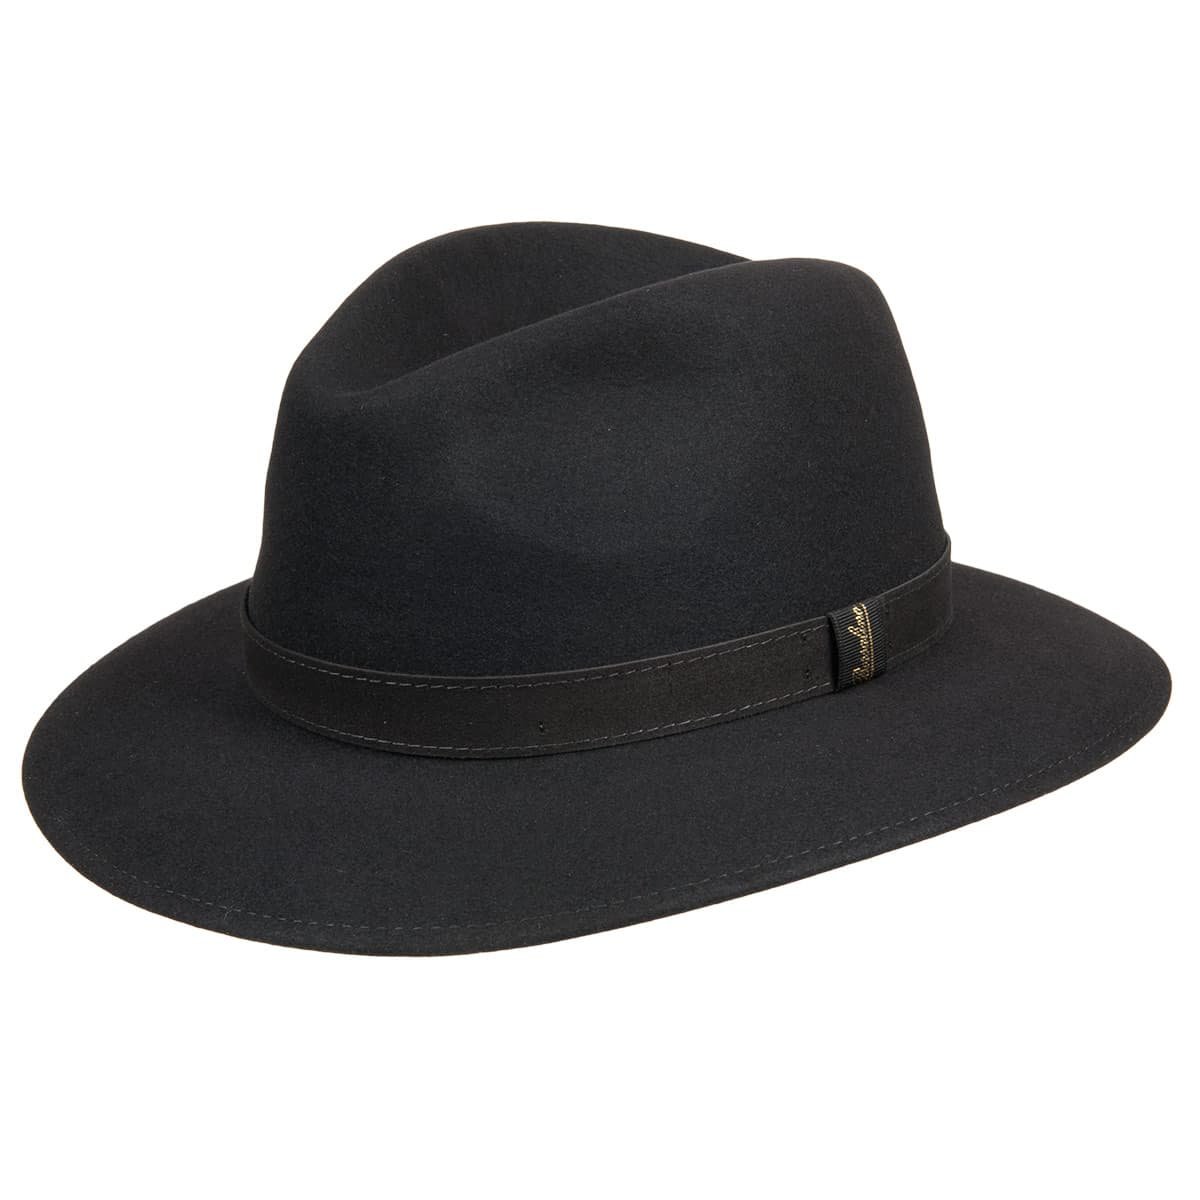 Borsalino traveller hat in excellent quality